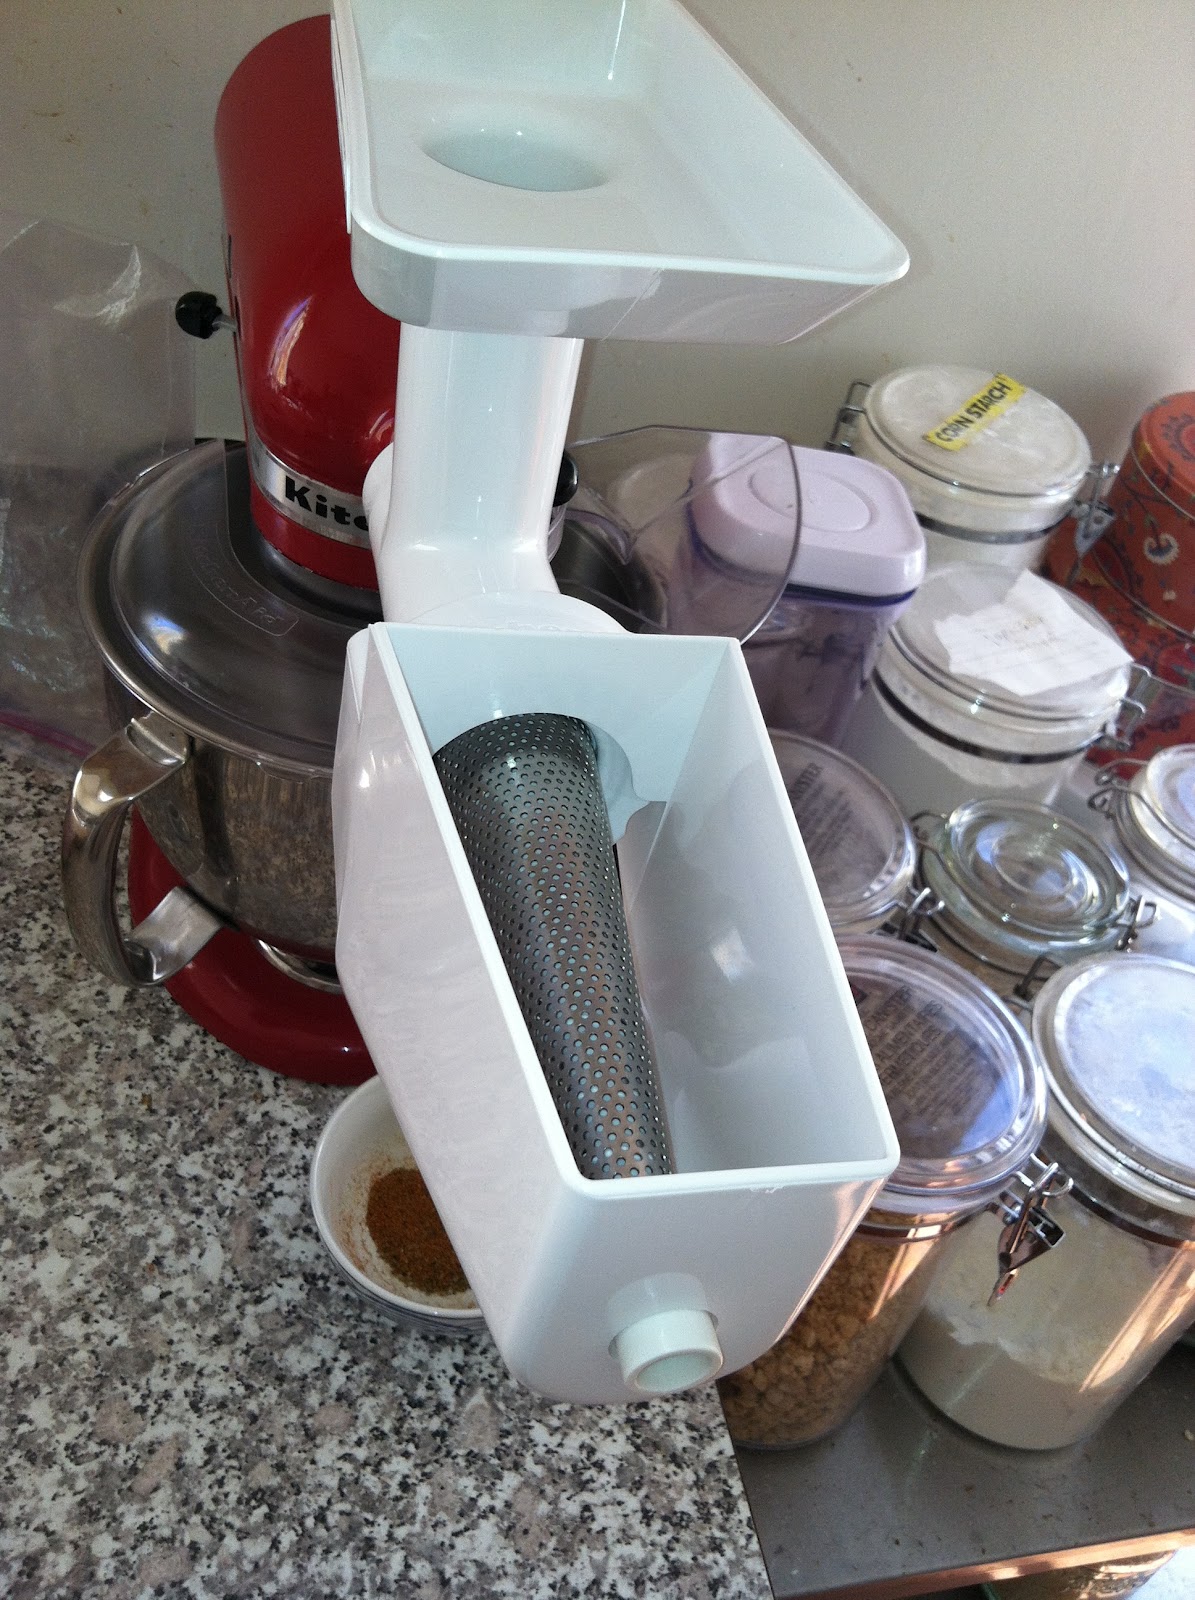 Tomato Juice Attachment For Kitchenaid Juicer Stand Mixer